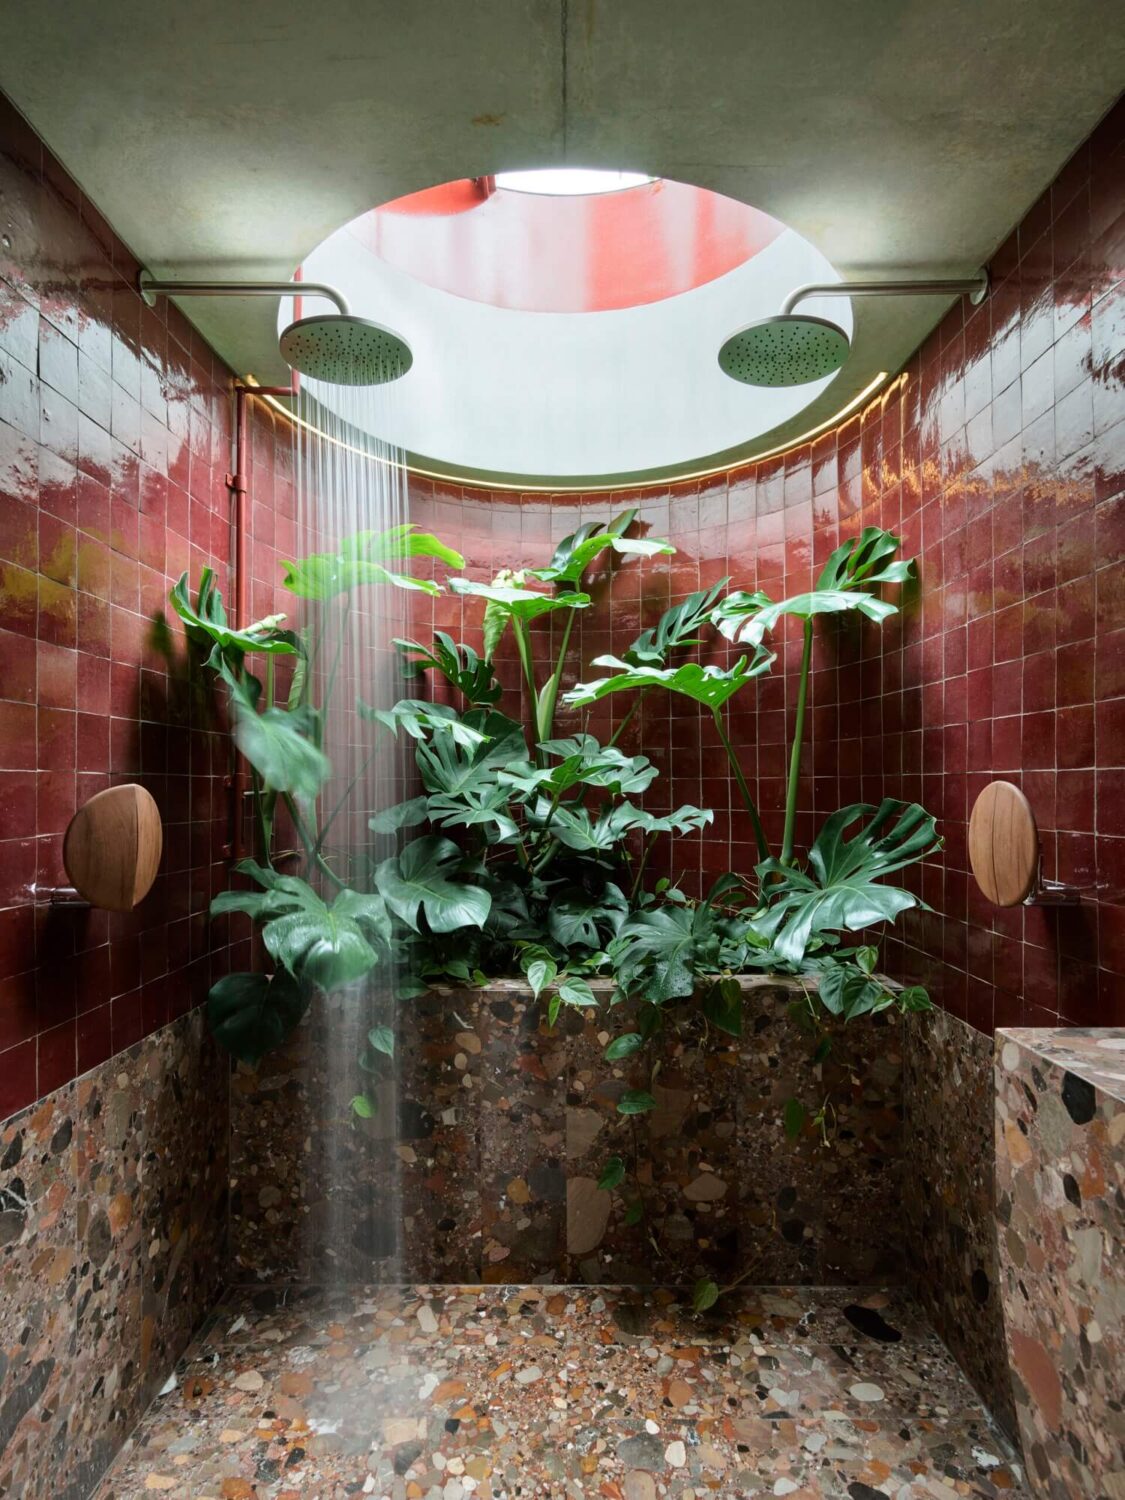 round-shower-with-plants-deep-red-tiles-nordroom